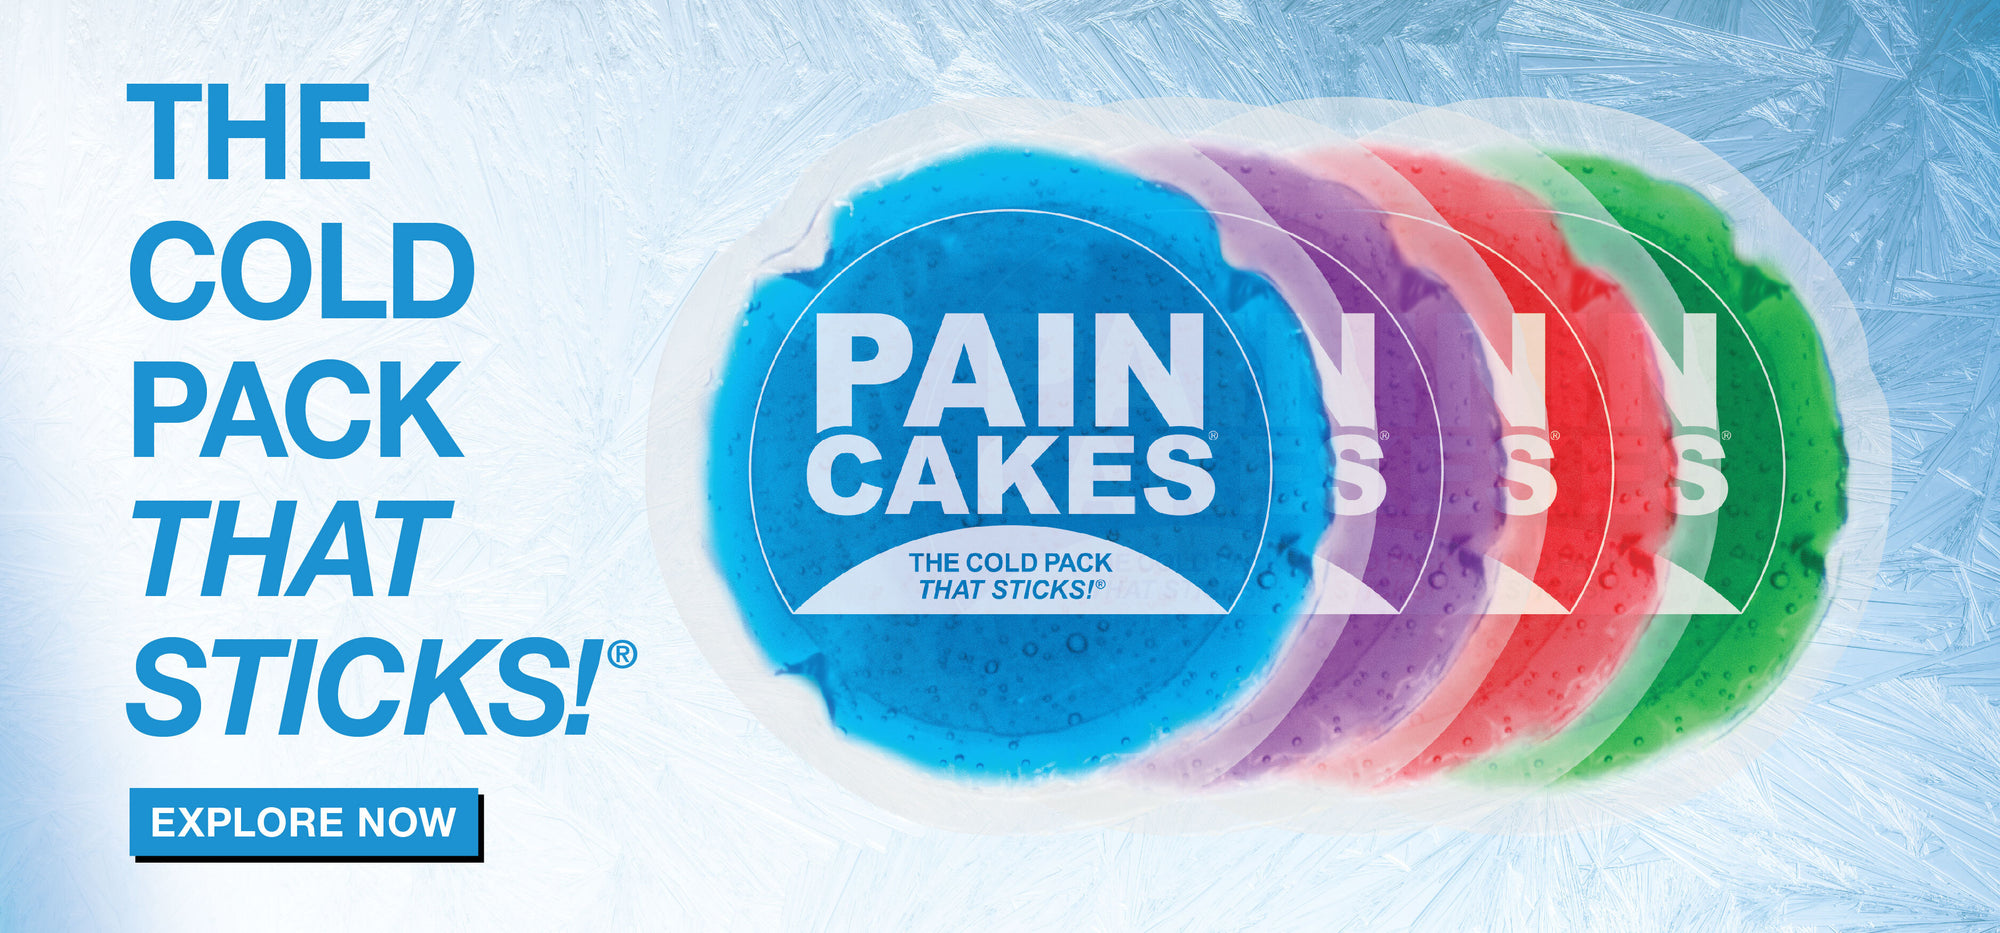 A PainCake on top of an icy background. Text, "The Cold Pack that Sticks!"